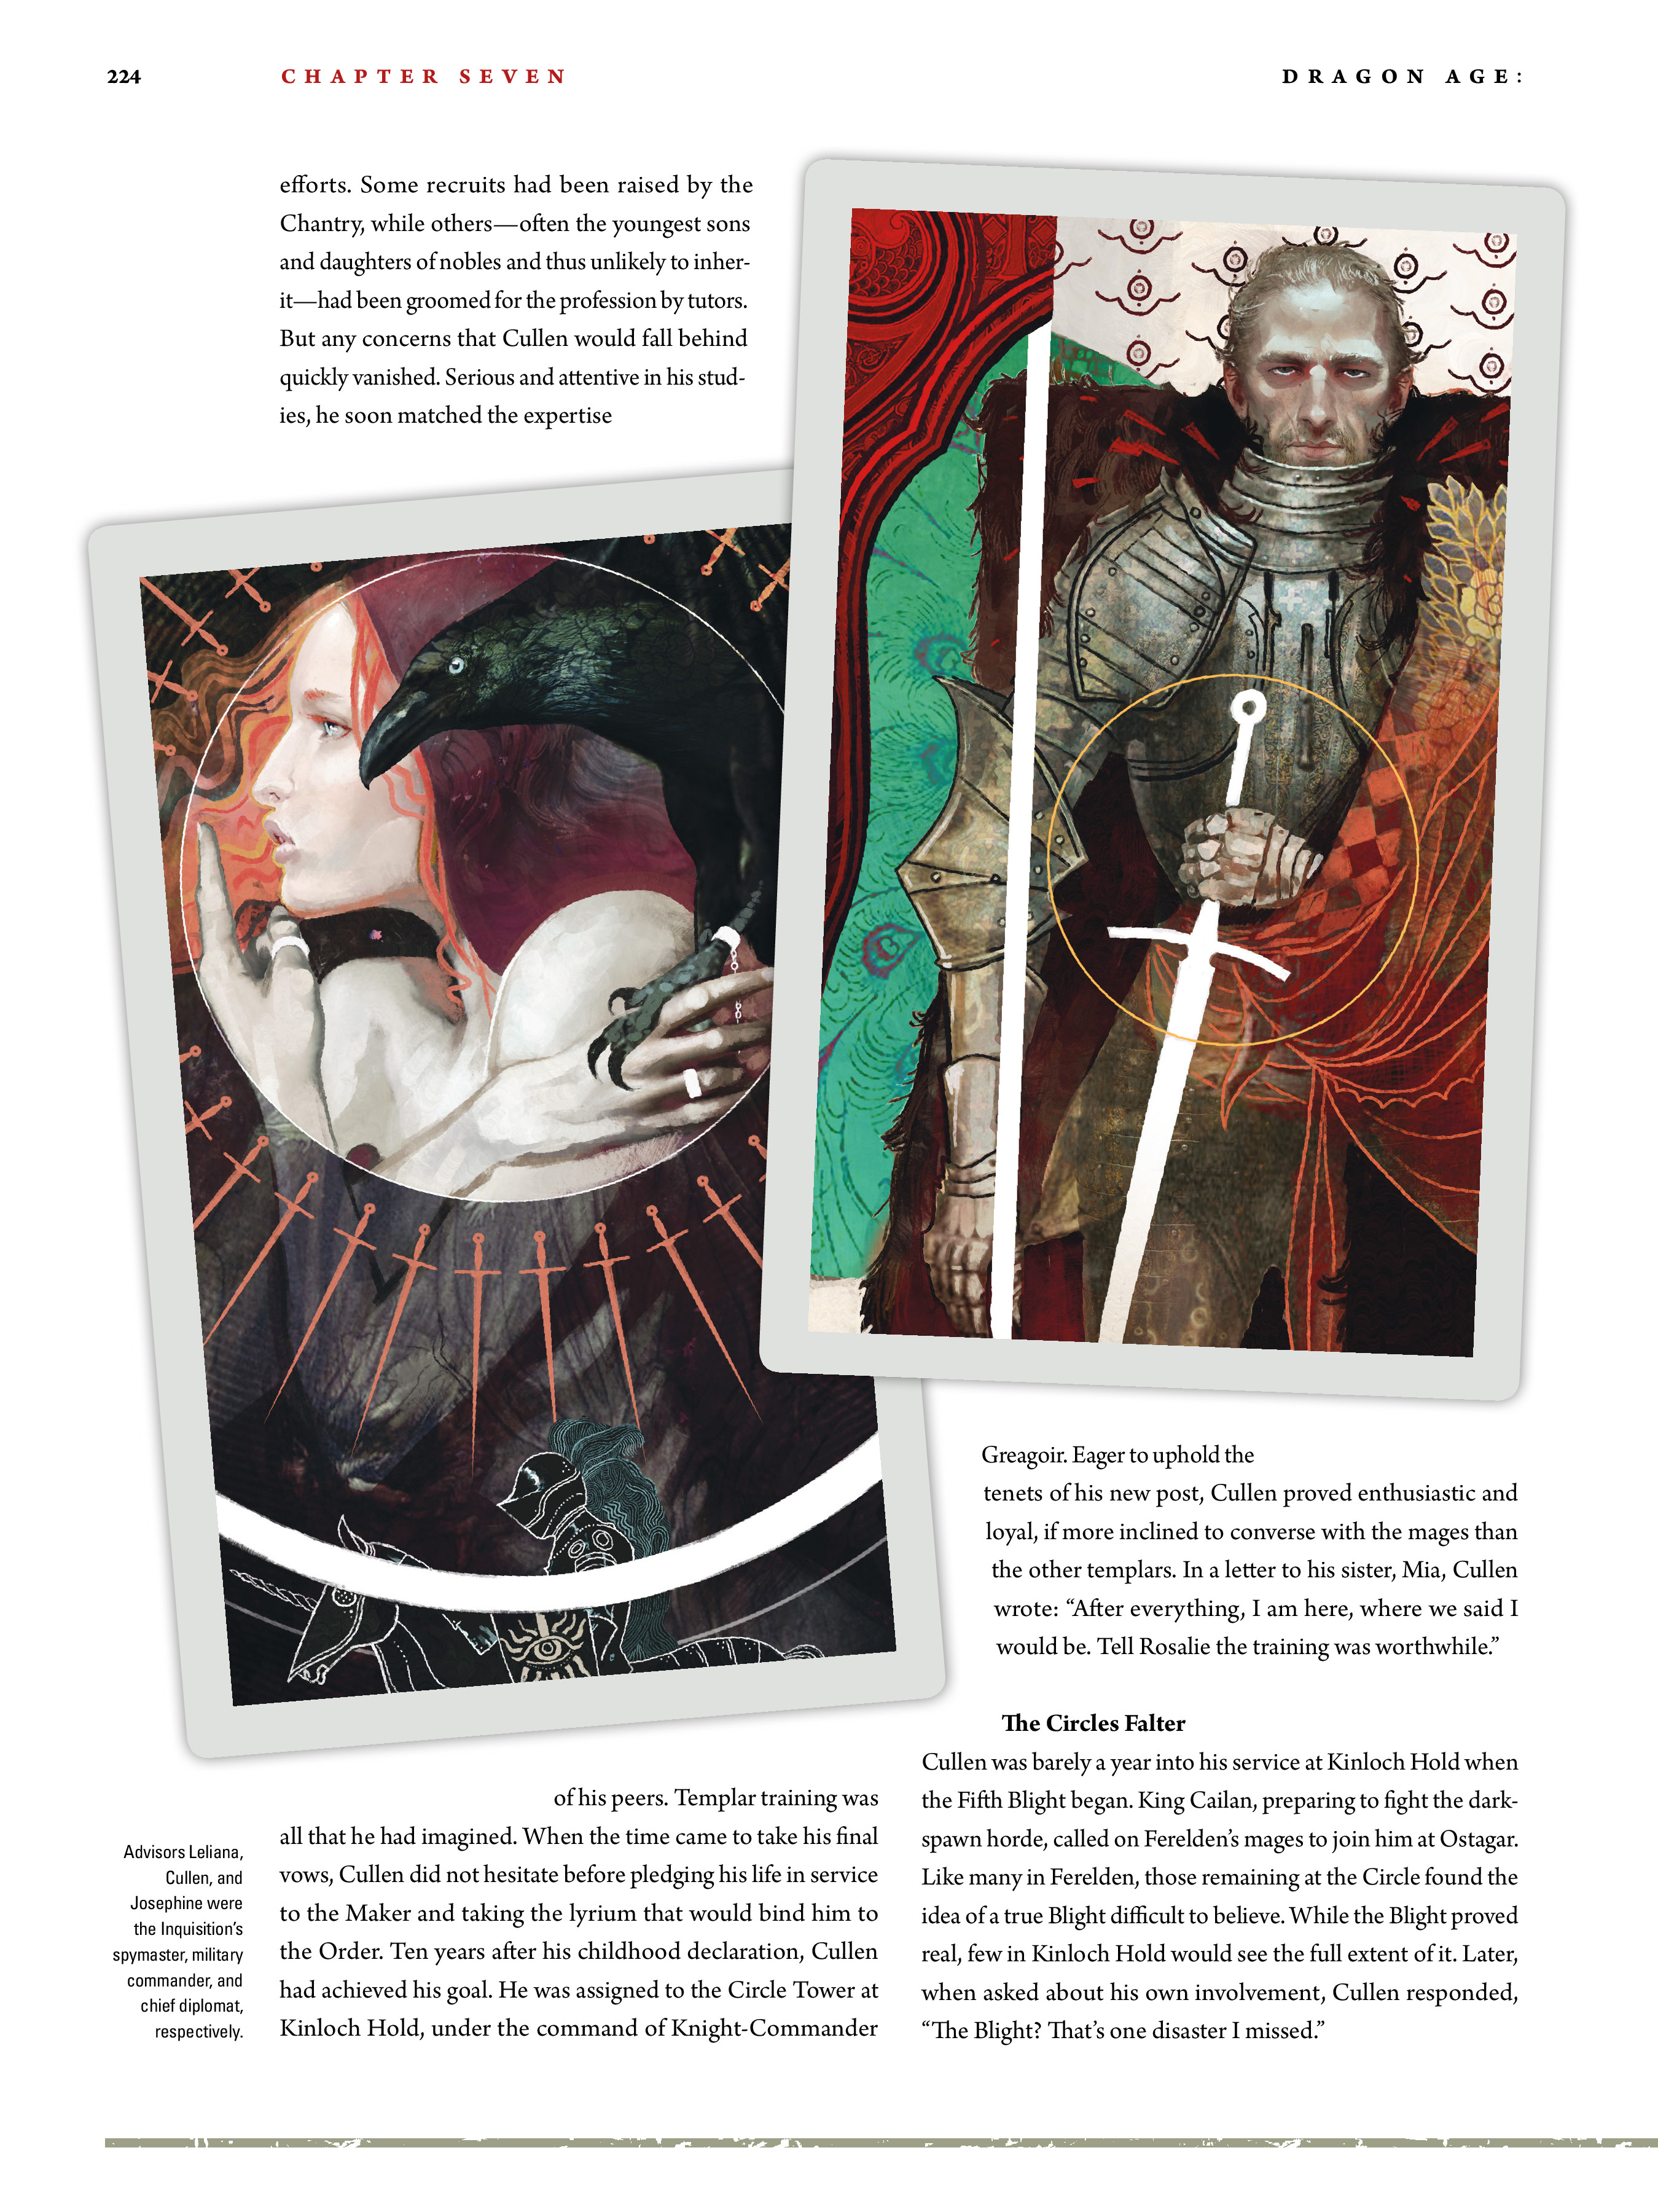 Read online Dragon Age: The World of Thedas comic -  Issue # TPB 2 - 219